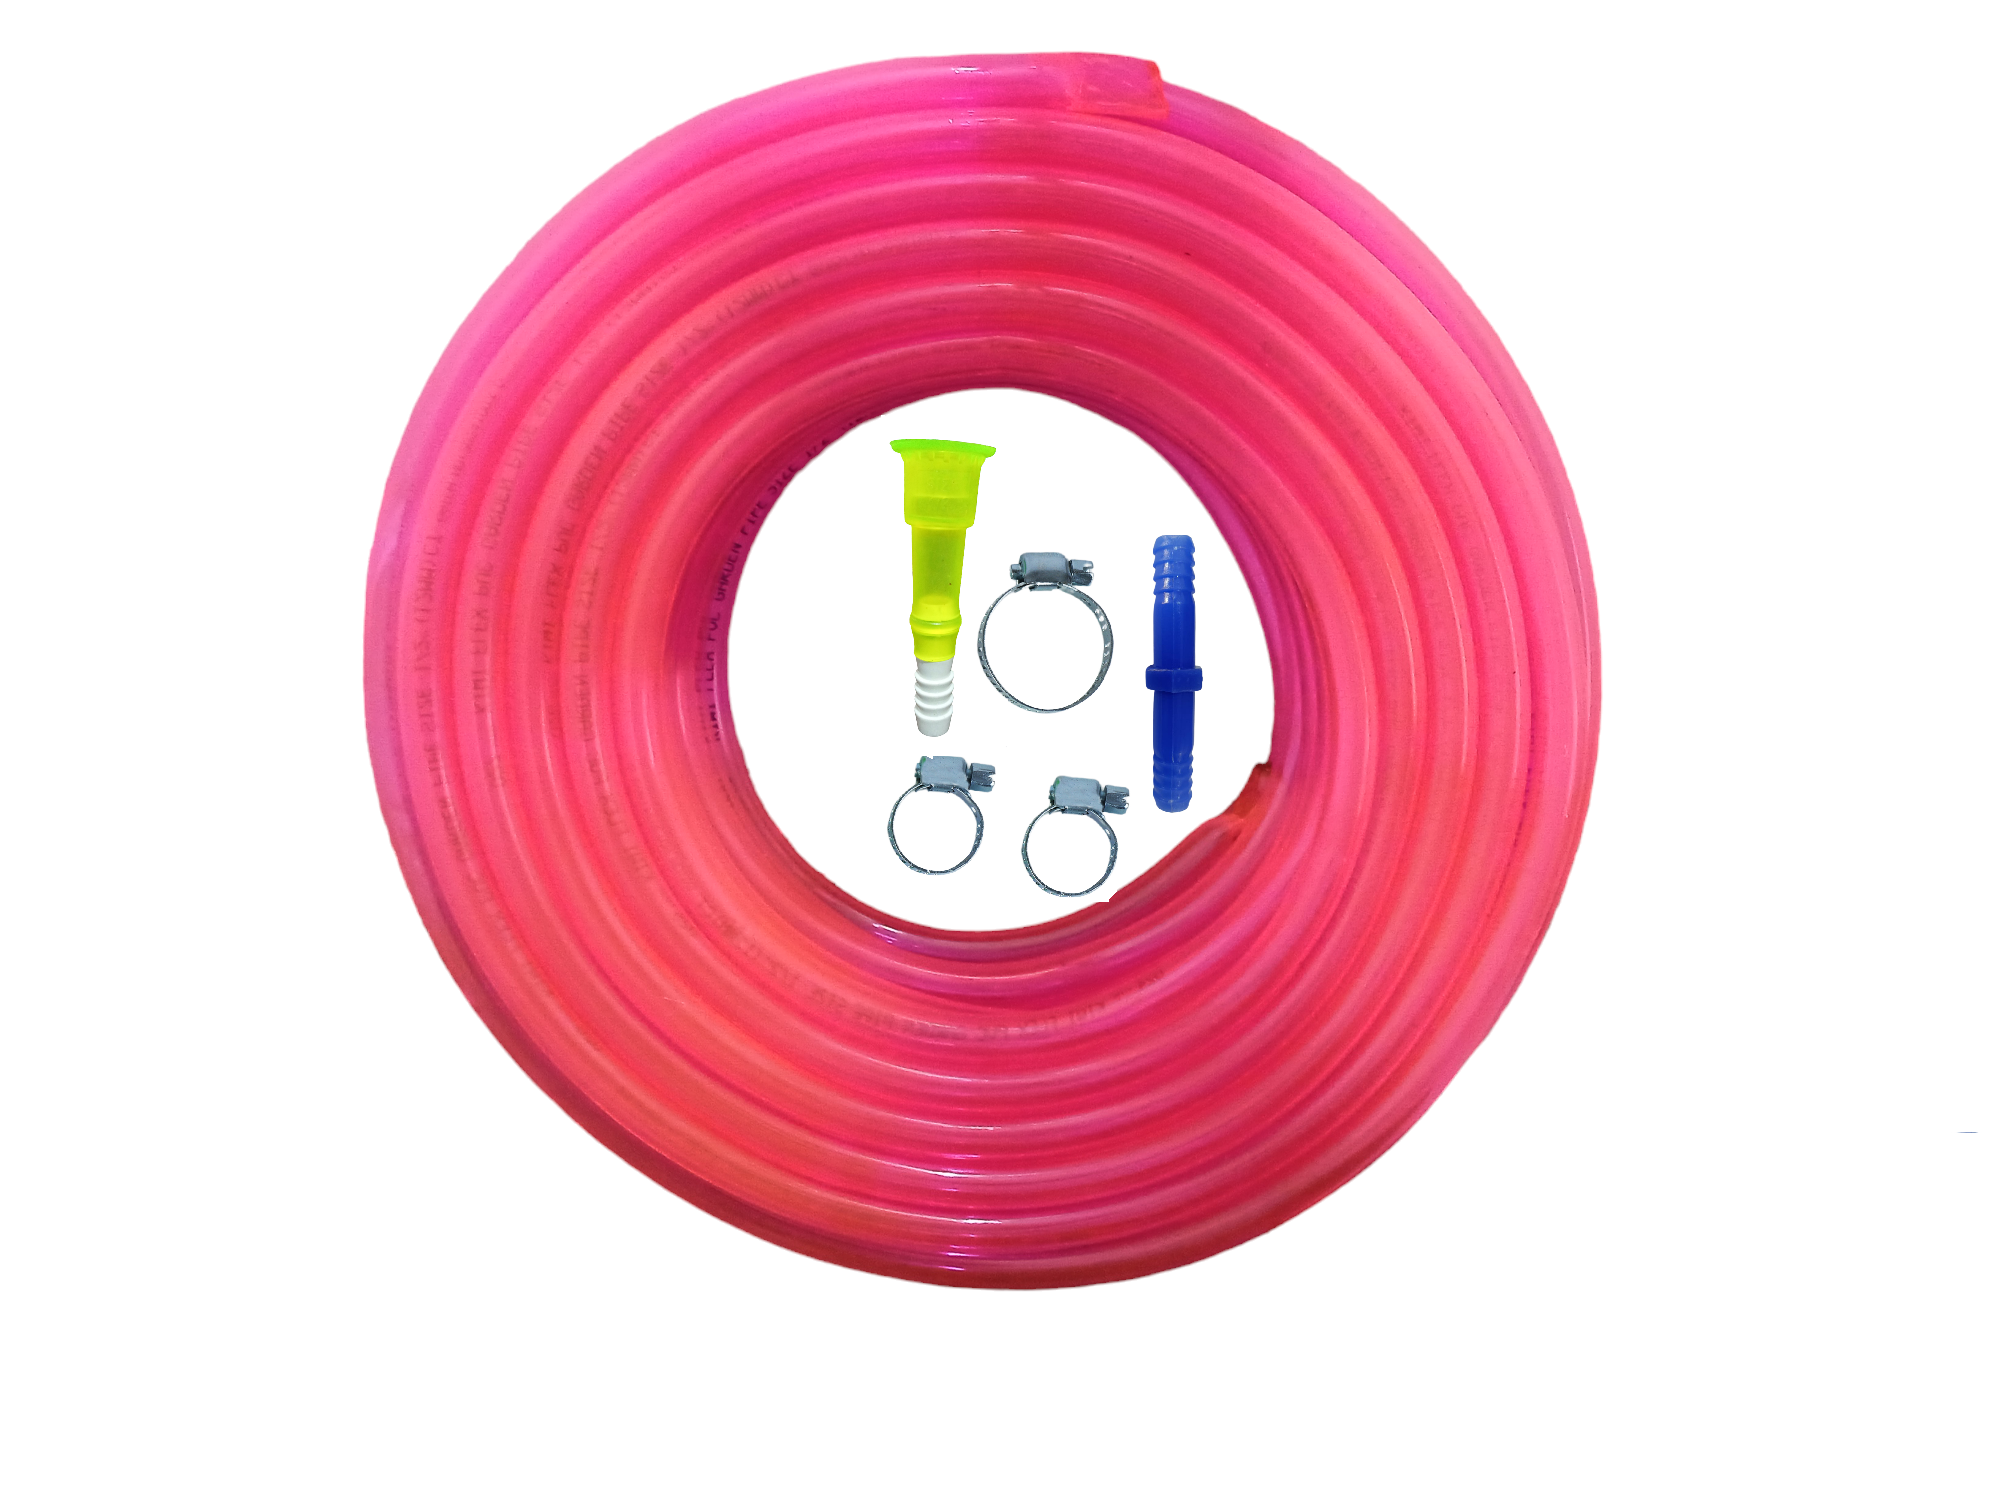 Utkarsh PVC Transparent Garden Water Hose Pipe (1" Inch) + 1 Tap Adapter, 3 Clamps & Jointer for Garden, Car Wash, Floor Clean, Pet Bath, Easy to Connect Indoor/Outdoor Use (Multicolor)